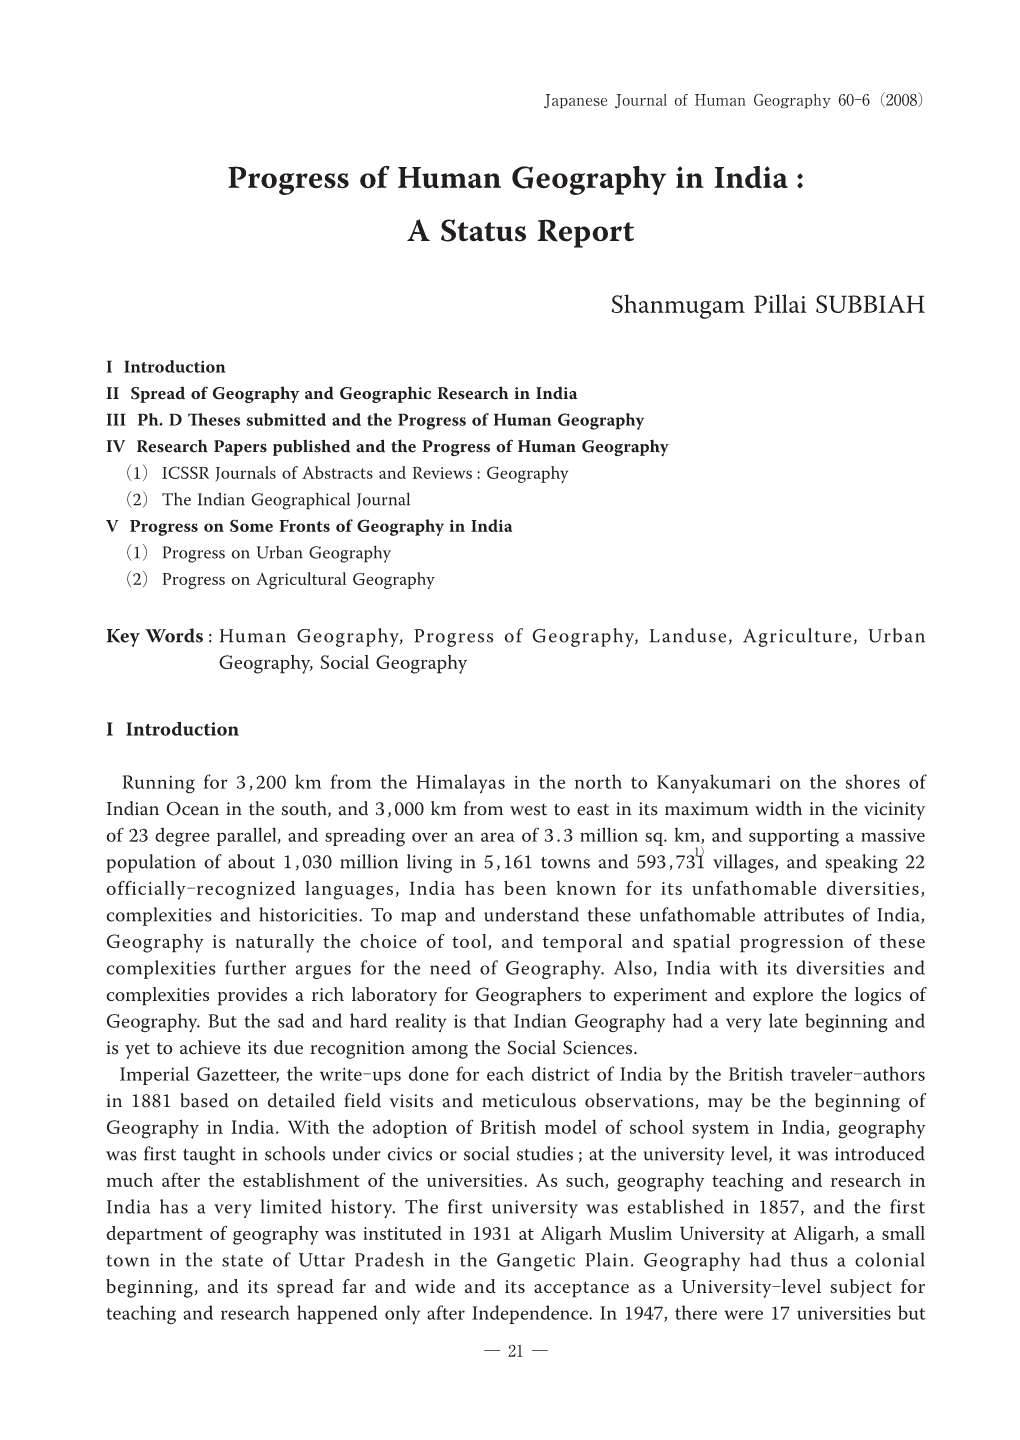 Progress of Human Geography in India : a Status Report